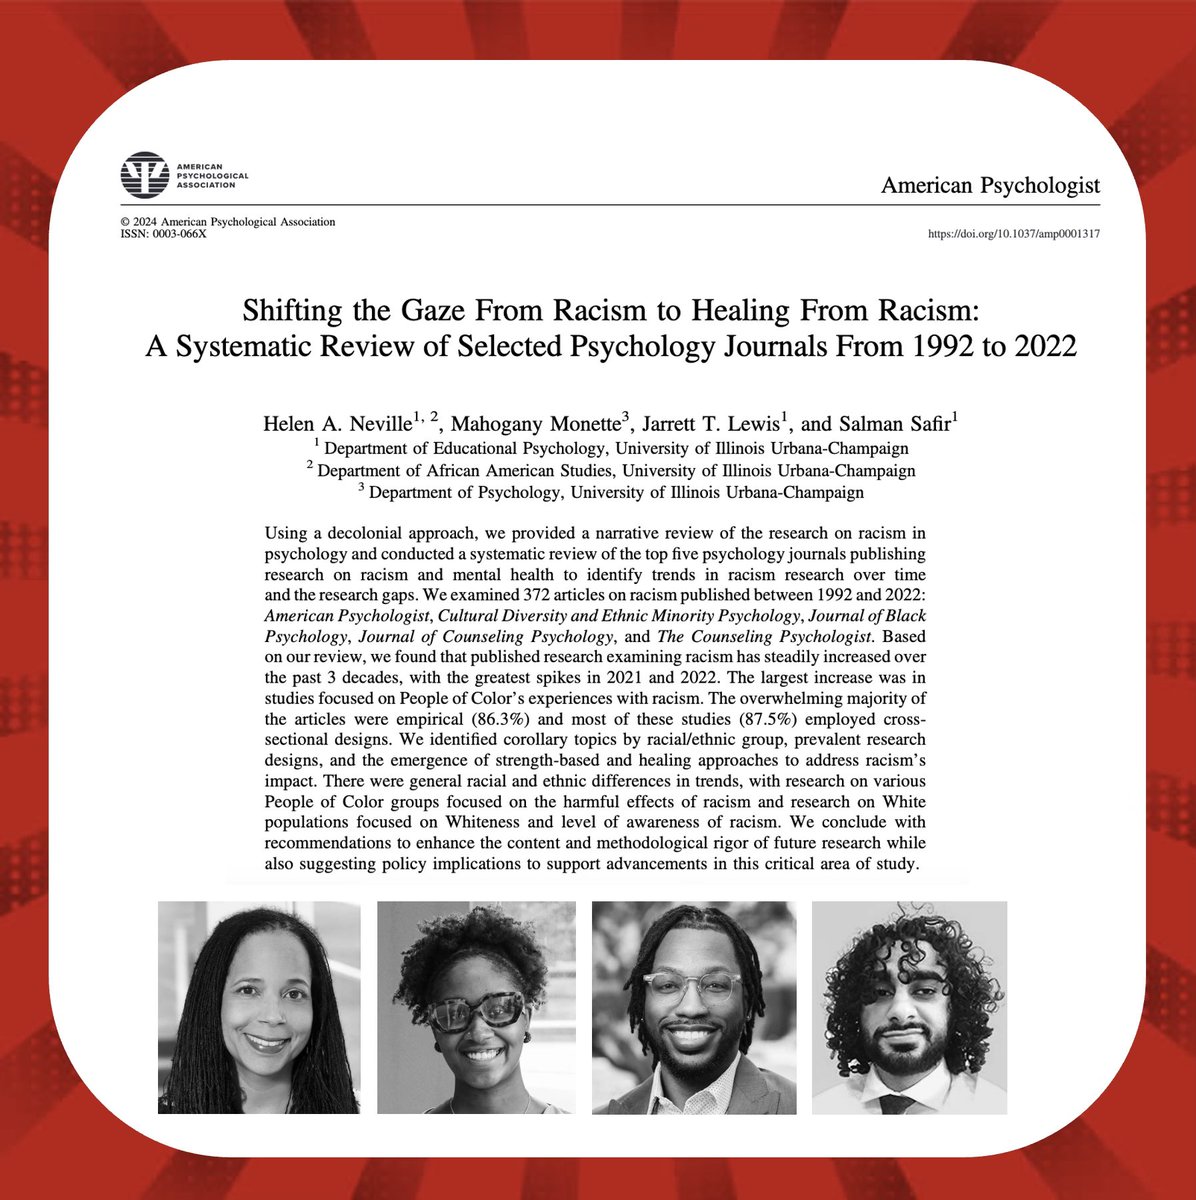 📣 New Publication Alert 📣A lot of labor & love went into this #AmericanPsychologist article where we provided a systematic review of the top 5 psychology journals publishing research on racism & mental health between 1992-2022. @MahoganyAlexus @JarrettTLewis @salmanpsyc